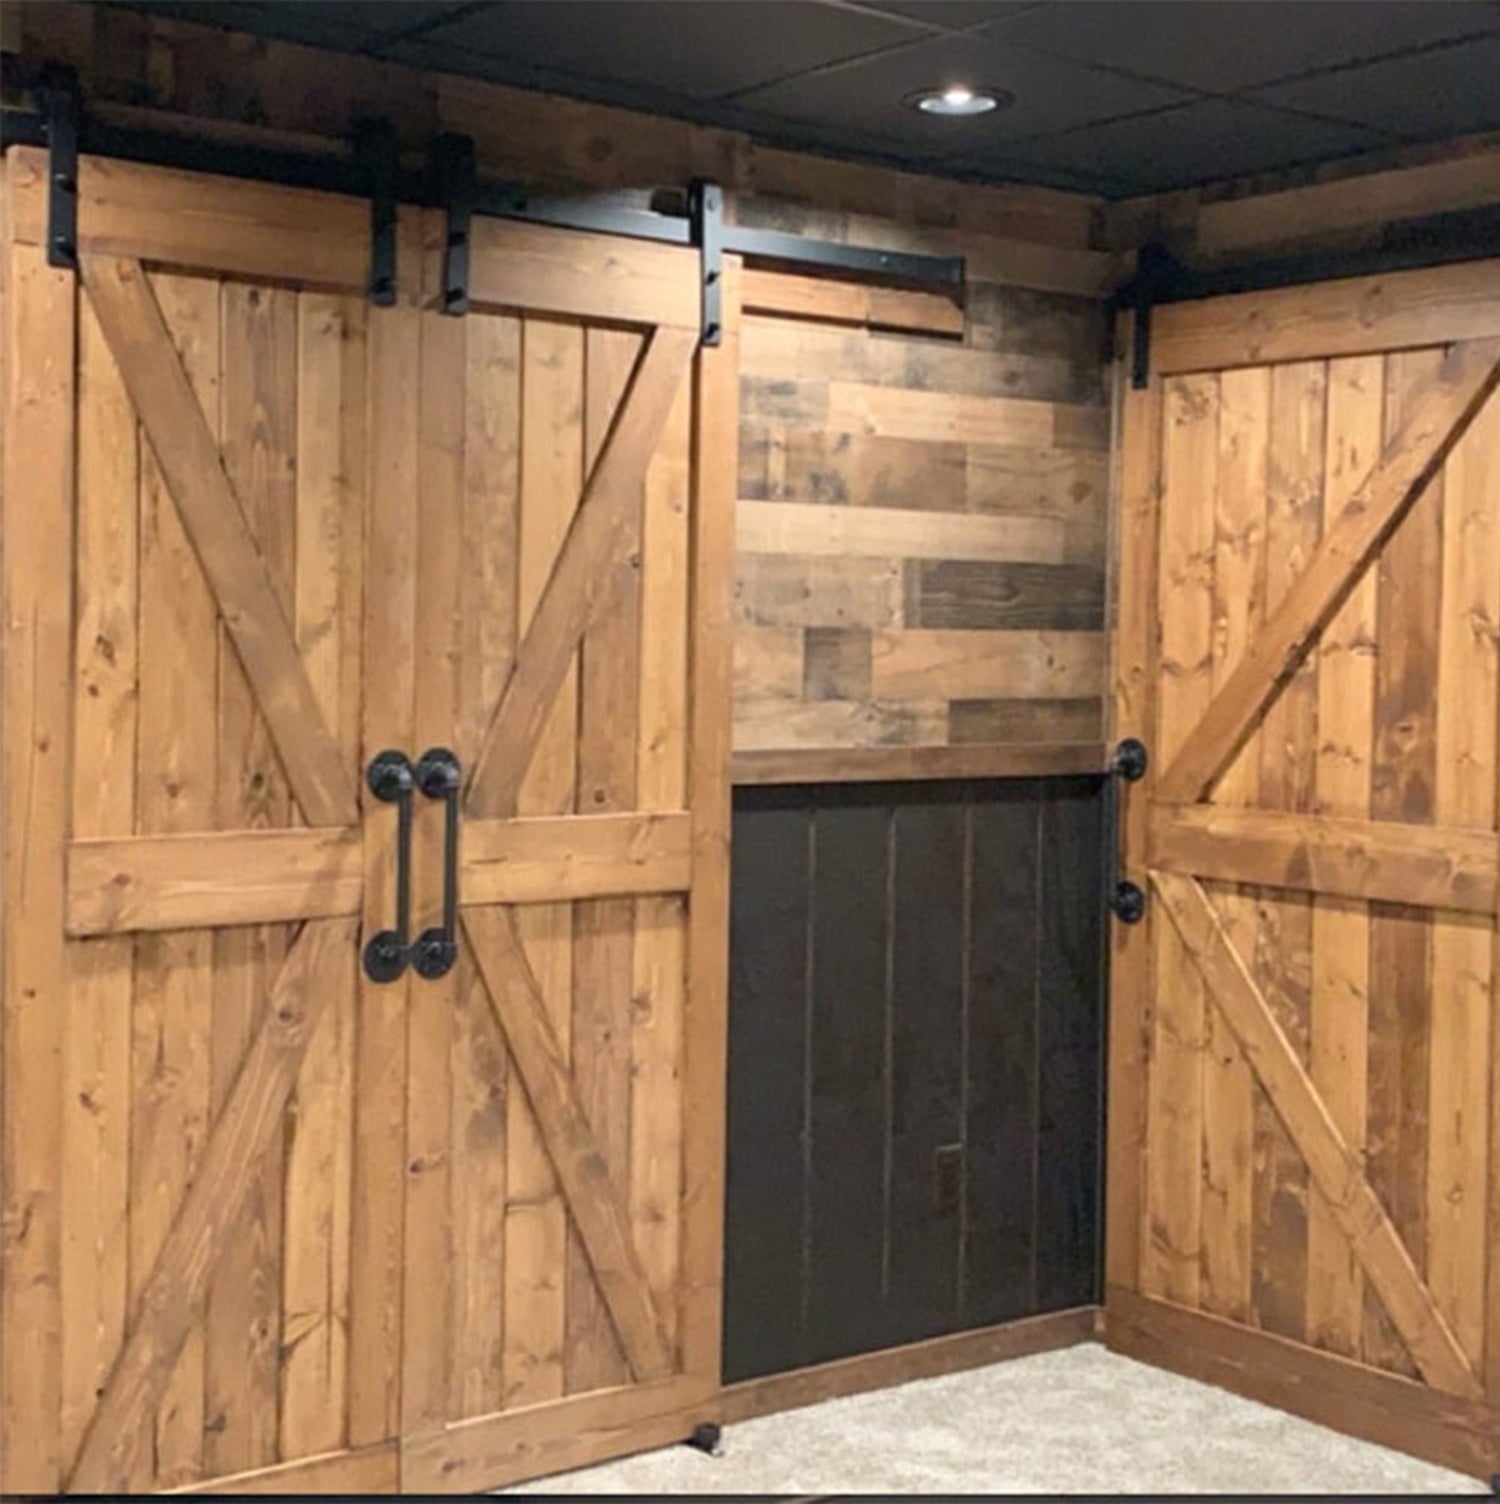 Room with wood paneling and the Custom Double British Brace K Style Barn Door